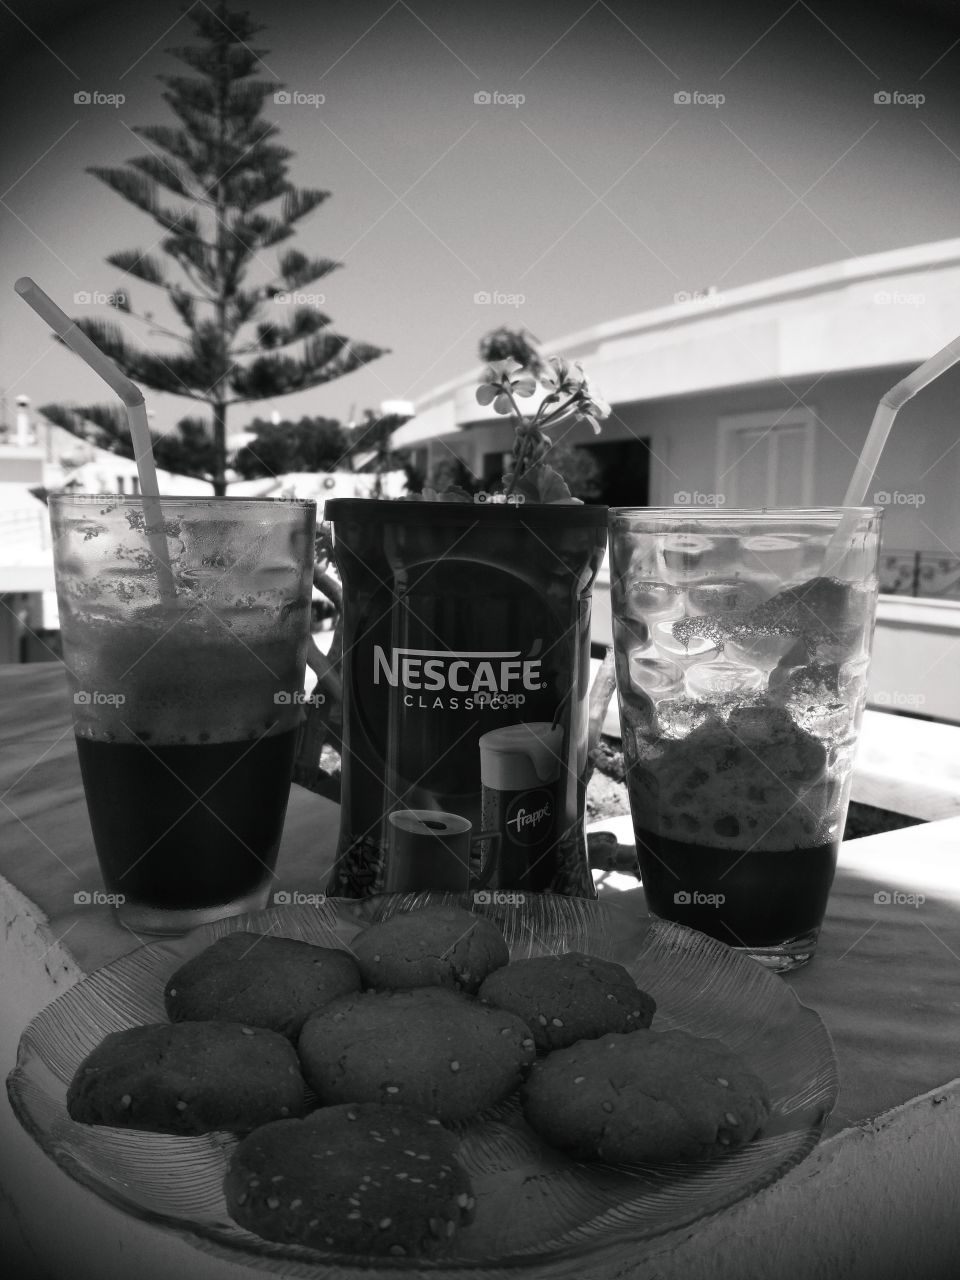 morning with my wife and Nescafé.